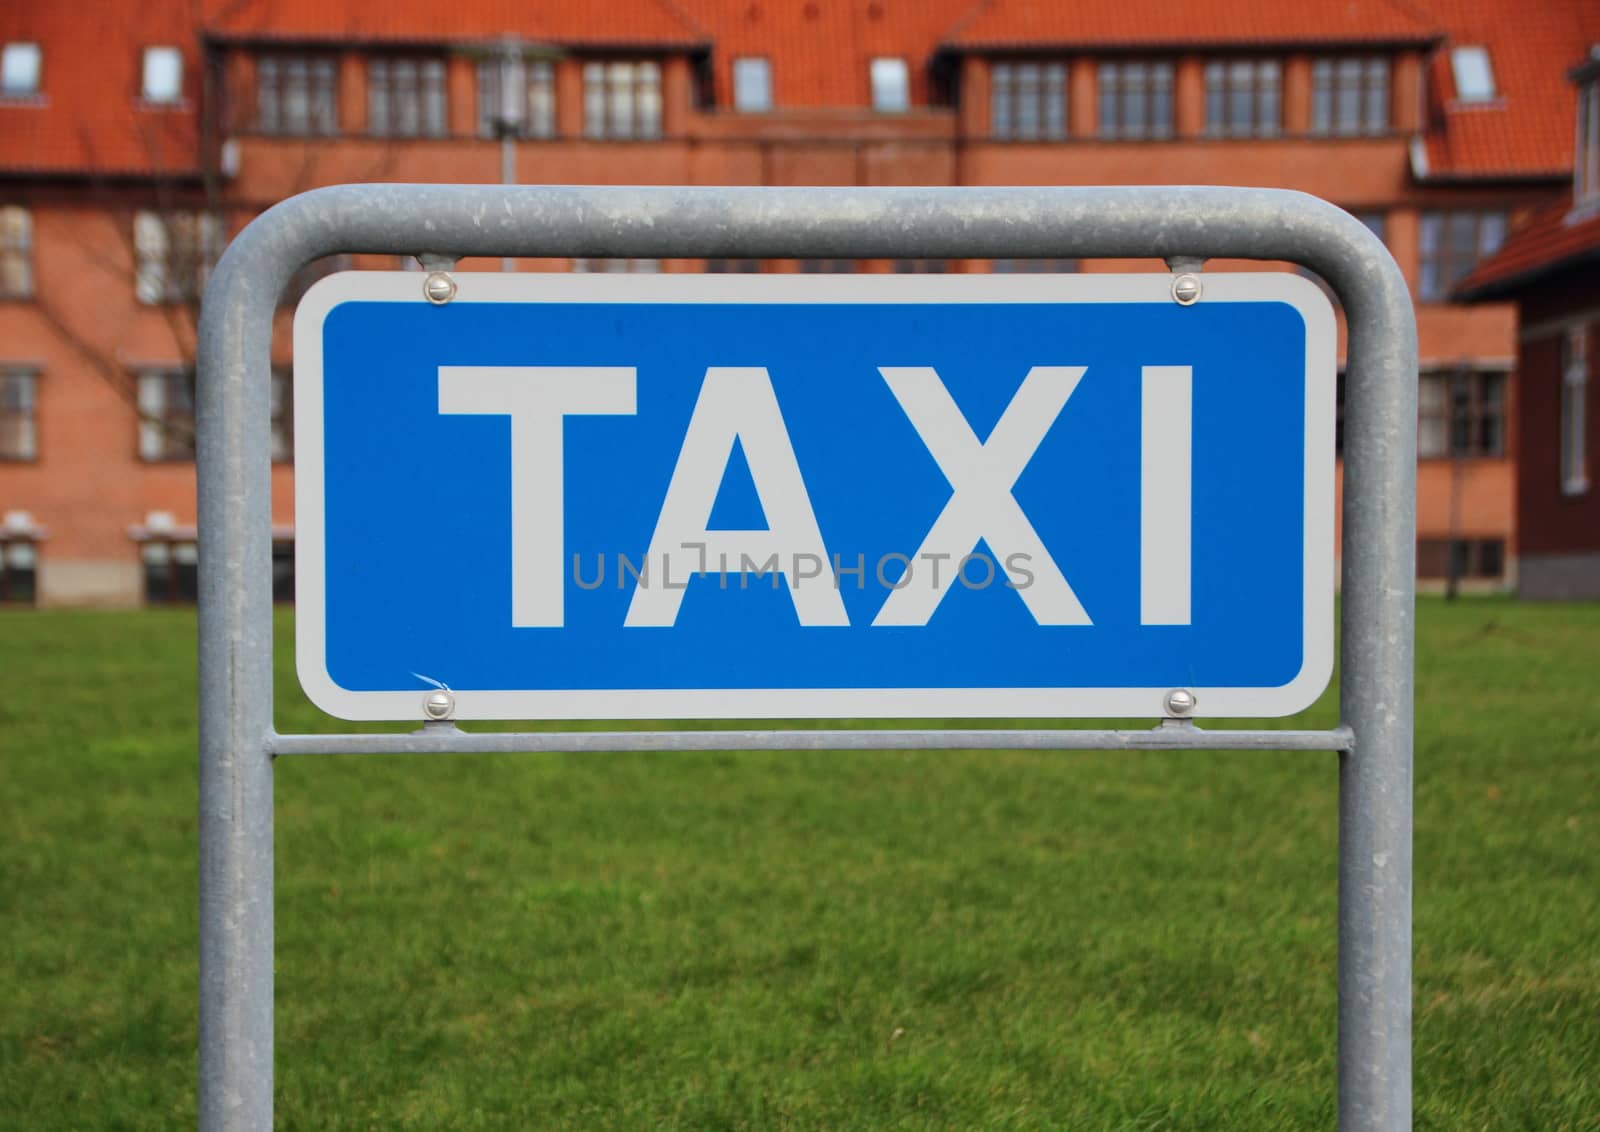 Taxi Sign Closeup with Building and Grass Background by HoleInTheBox